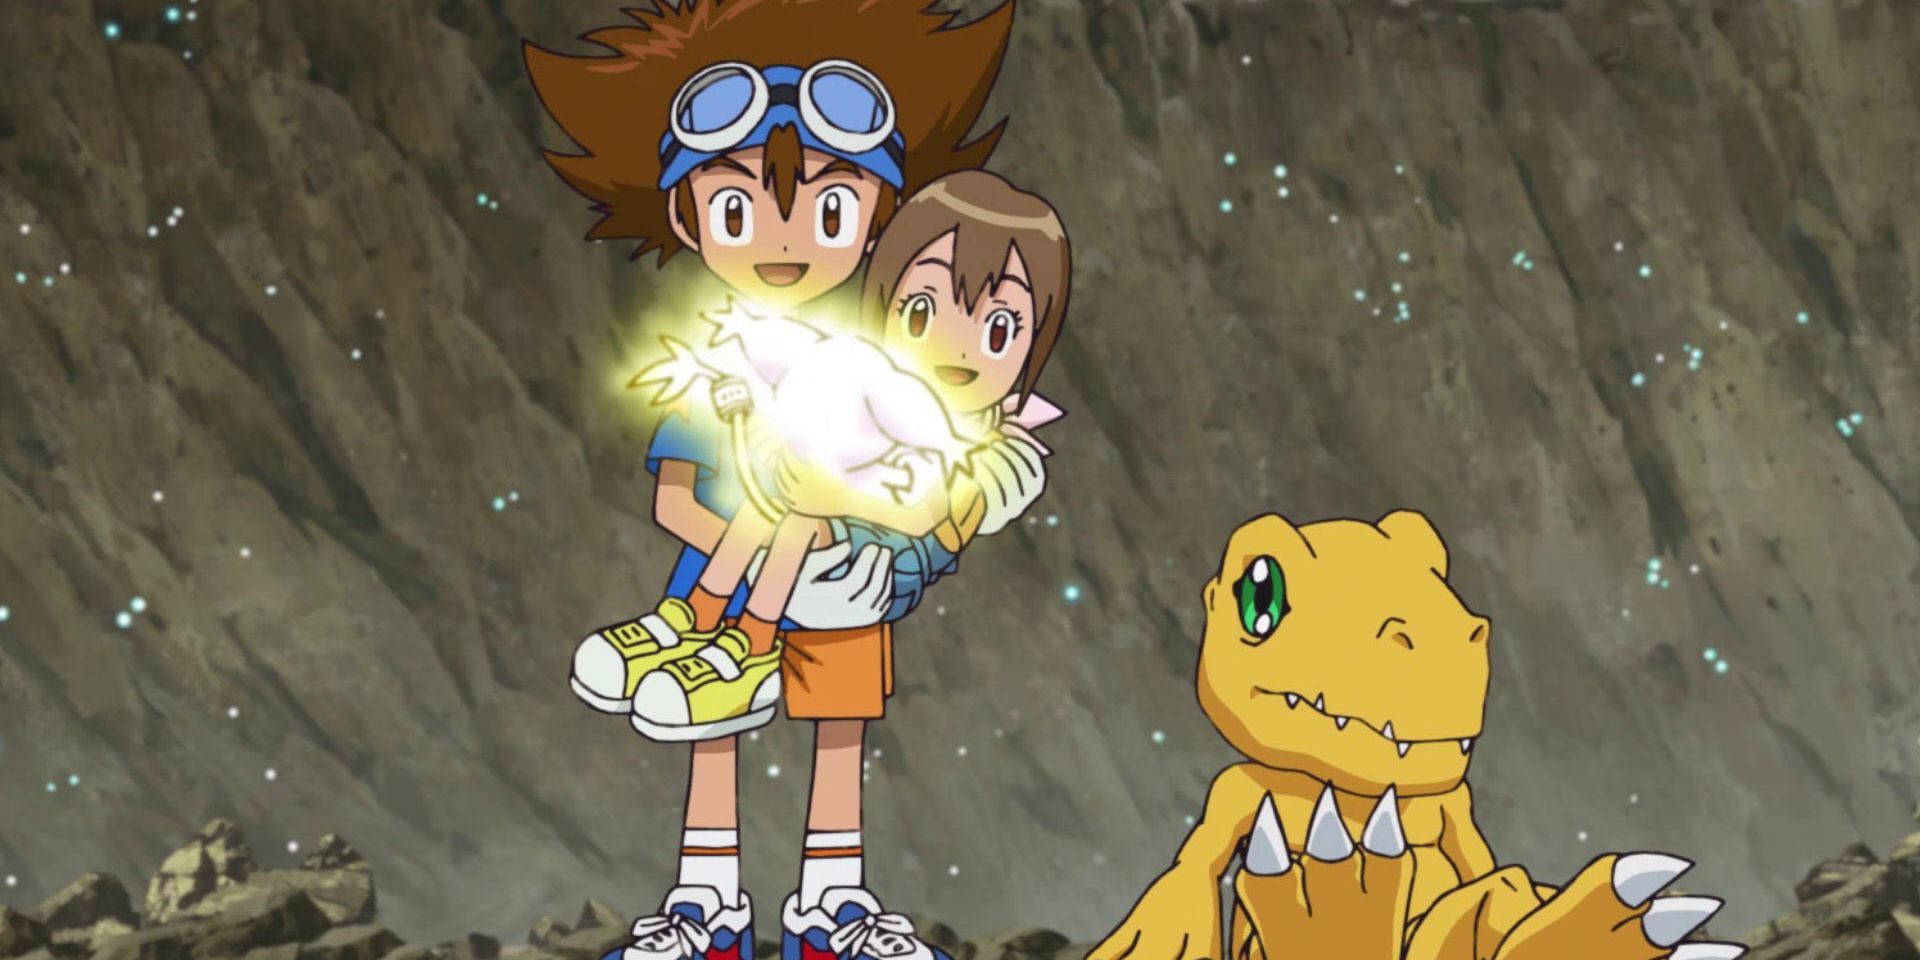 Digimon Anime Movie Is Coming To Theaters In North America